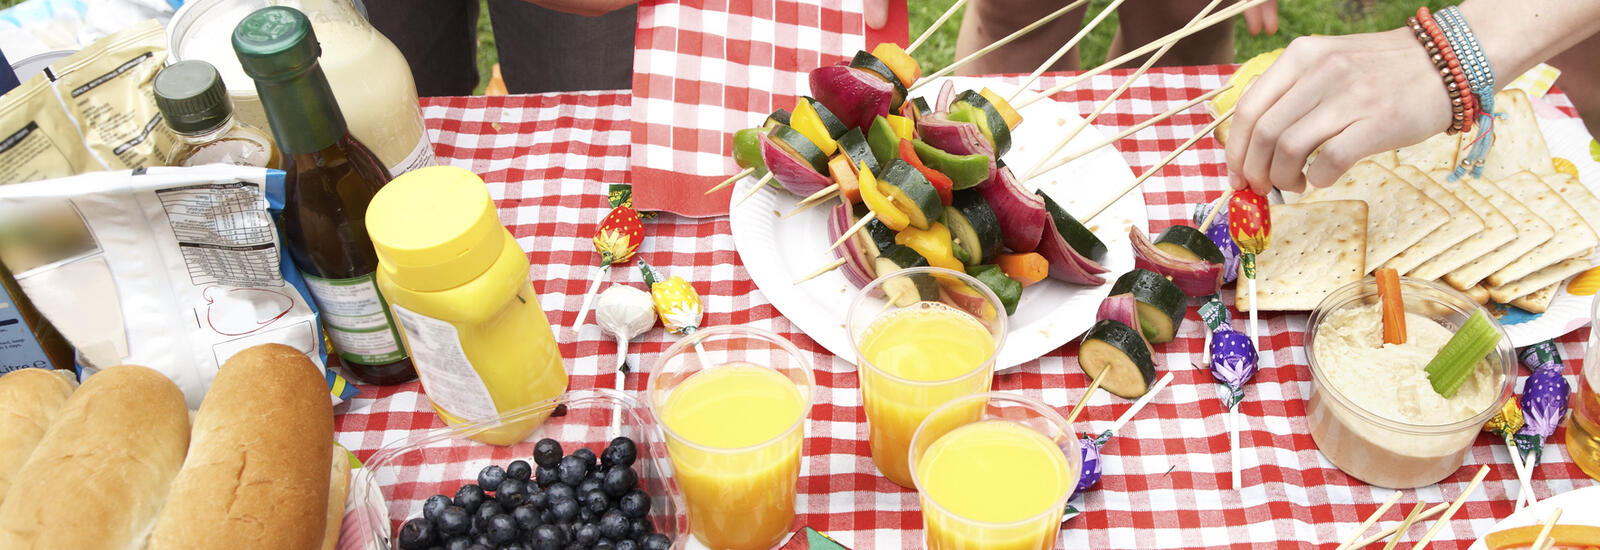 A table full of color foods for a picnic. People's hands reaching for food.